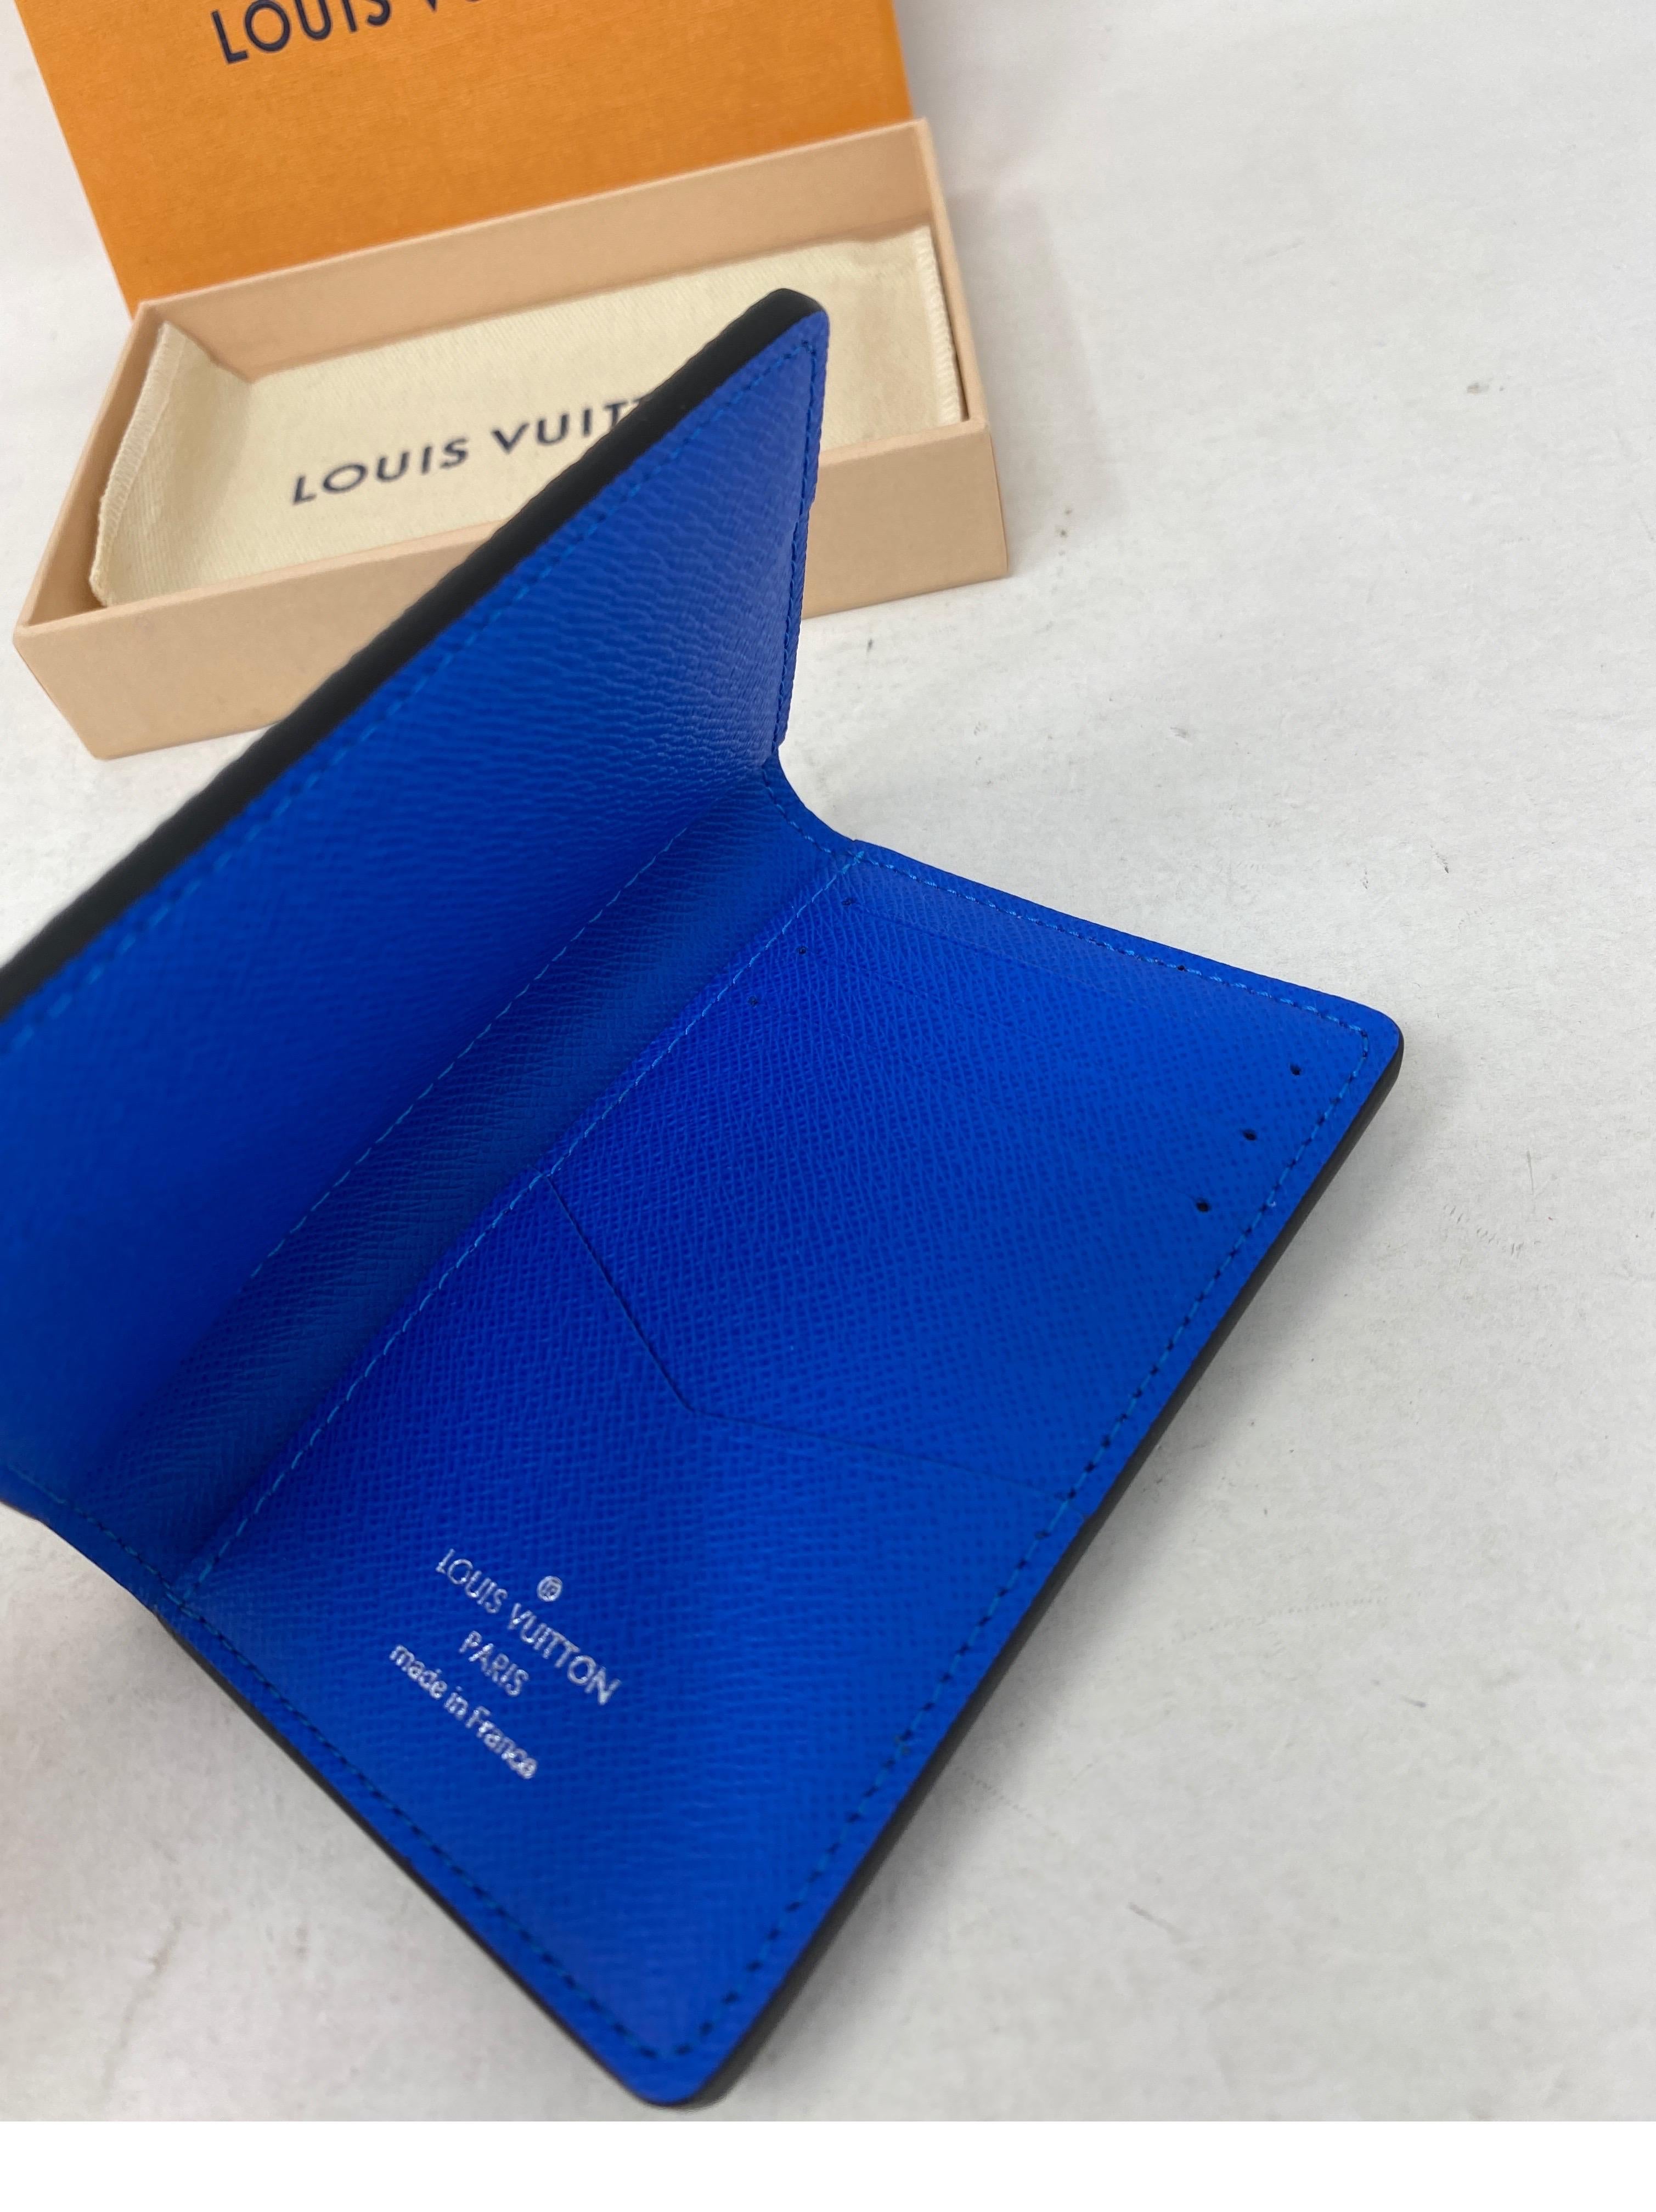 Louis Vuitton Virgil Abloh Blue  Green Monogram Illusion Leather PF  Slender Wallet 2022 Available For Immediate Sale At Sothebys